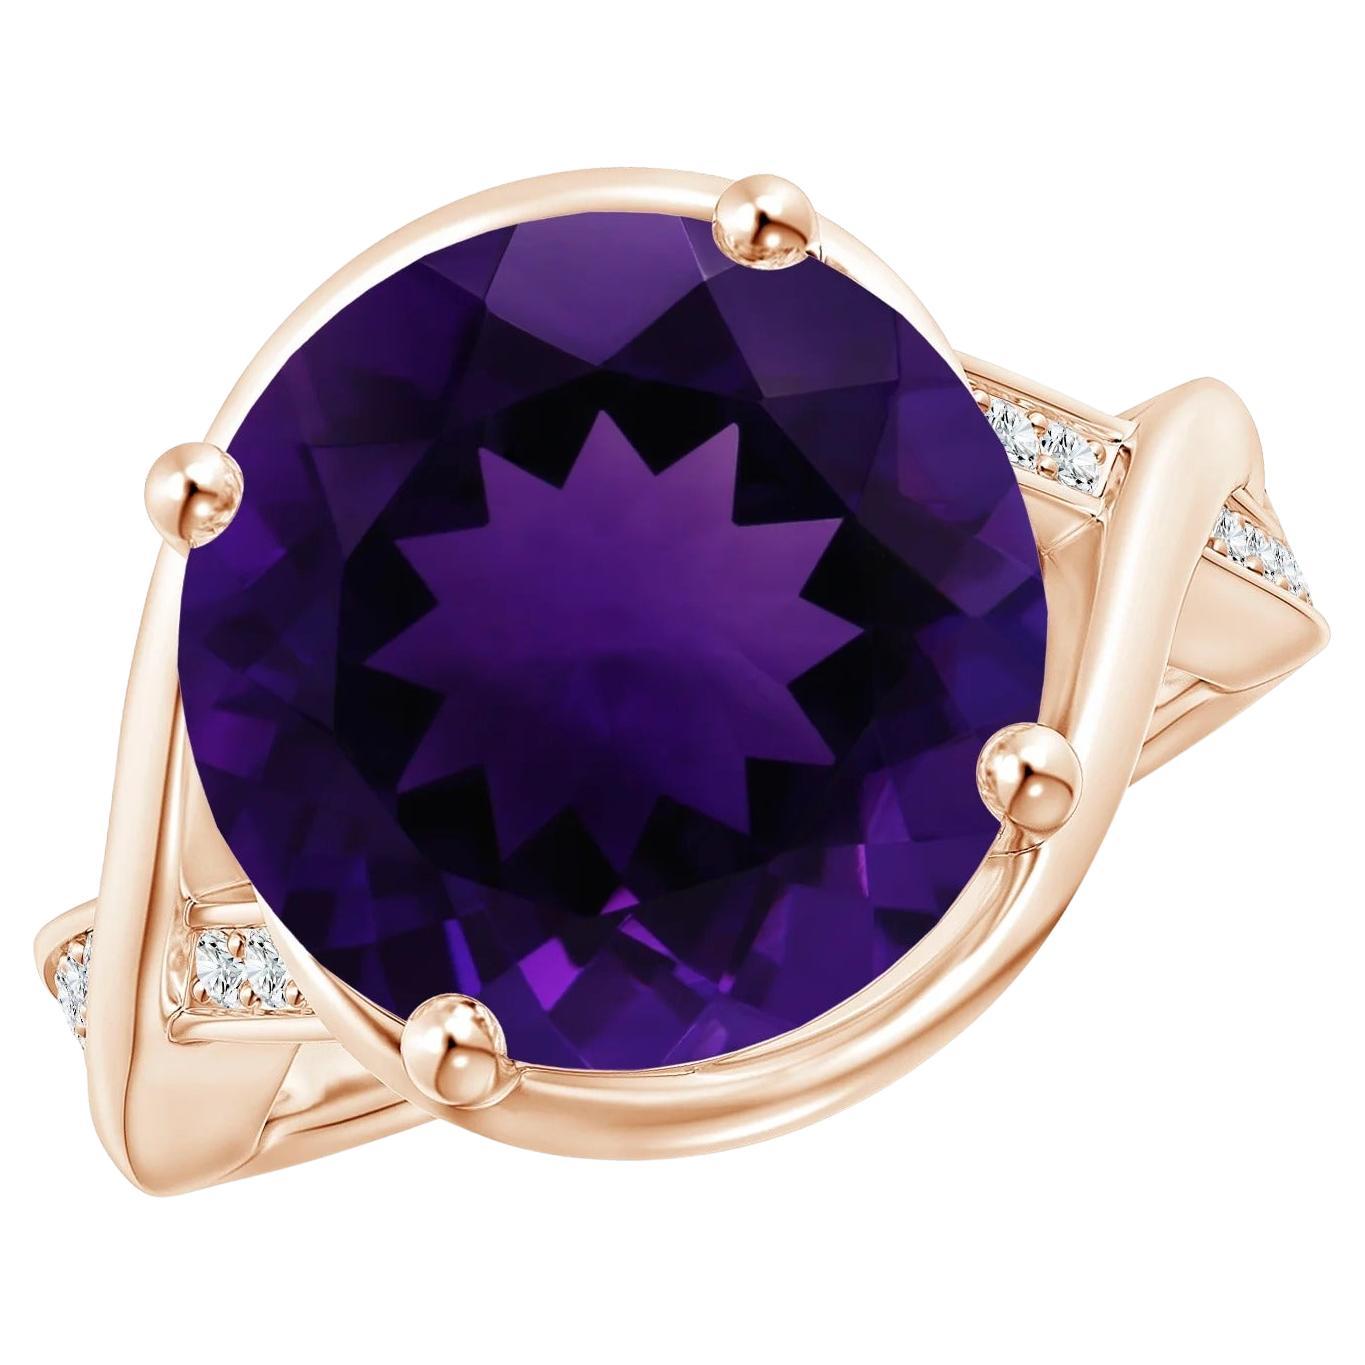 For Sale:  Angara Gia Certified Natural Amethyst Bypass Engagement Ring in Rose Gold